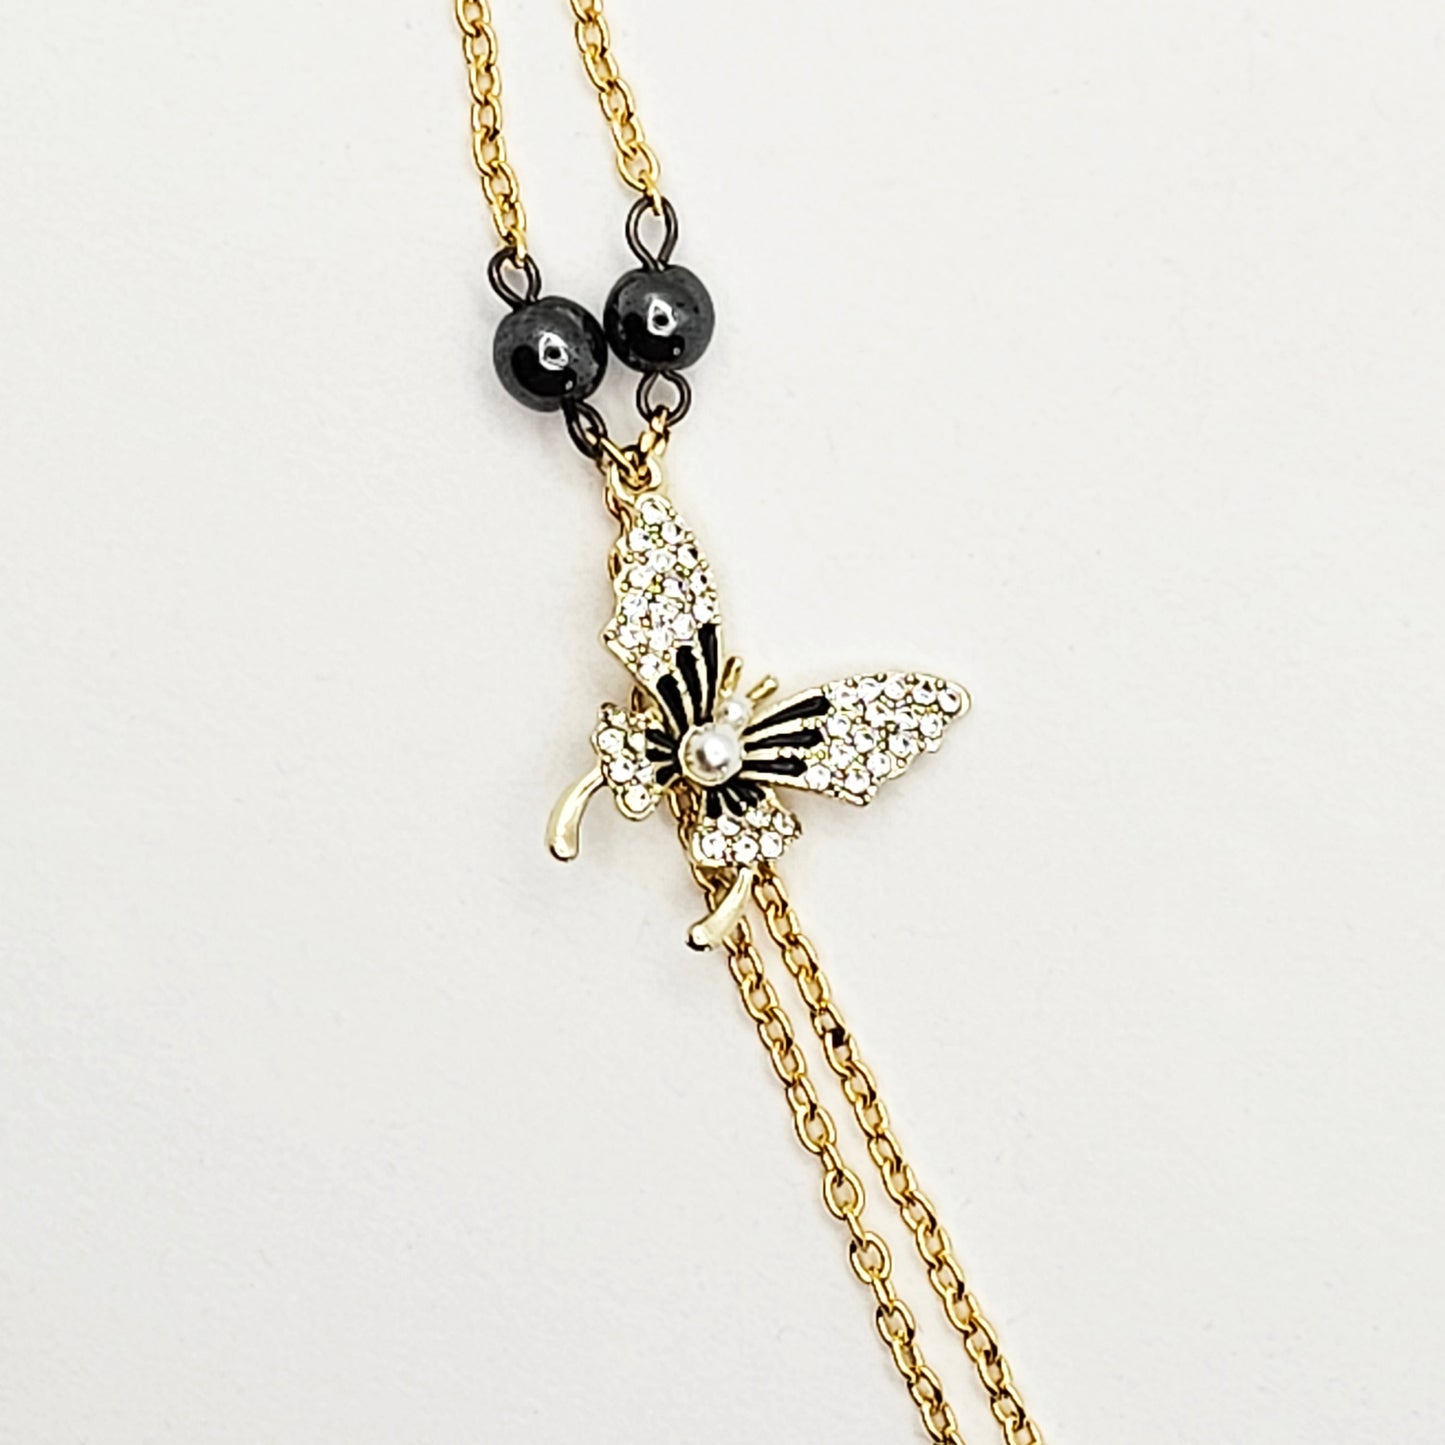 Gold Necklace to Nipple, Non-Piercing, with Beautiful Butterfly. Choose Nipple Nooses or Nipple Clamps. MATURE Body Jewelry